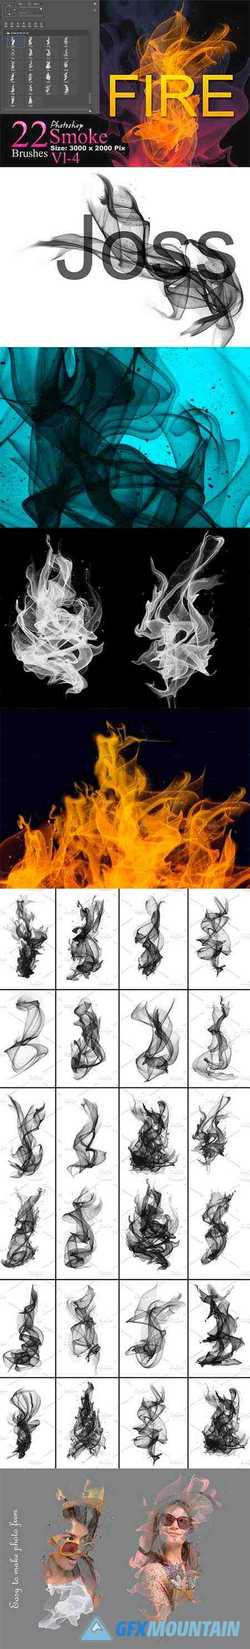 Fire and Smoke Photoshop Brushes 3680876